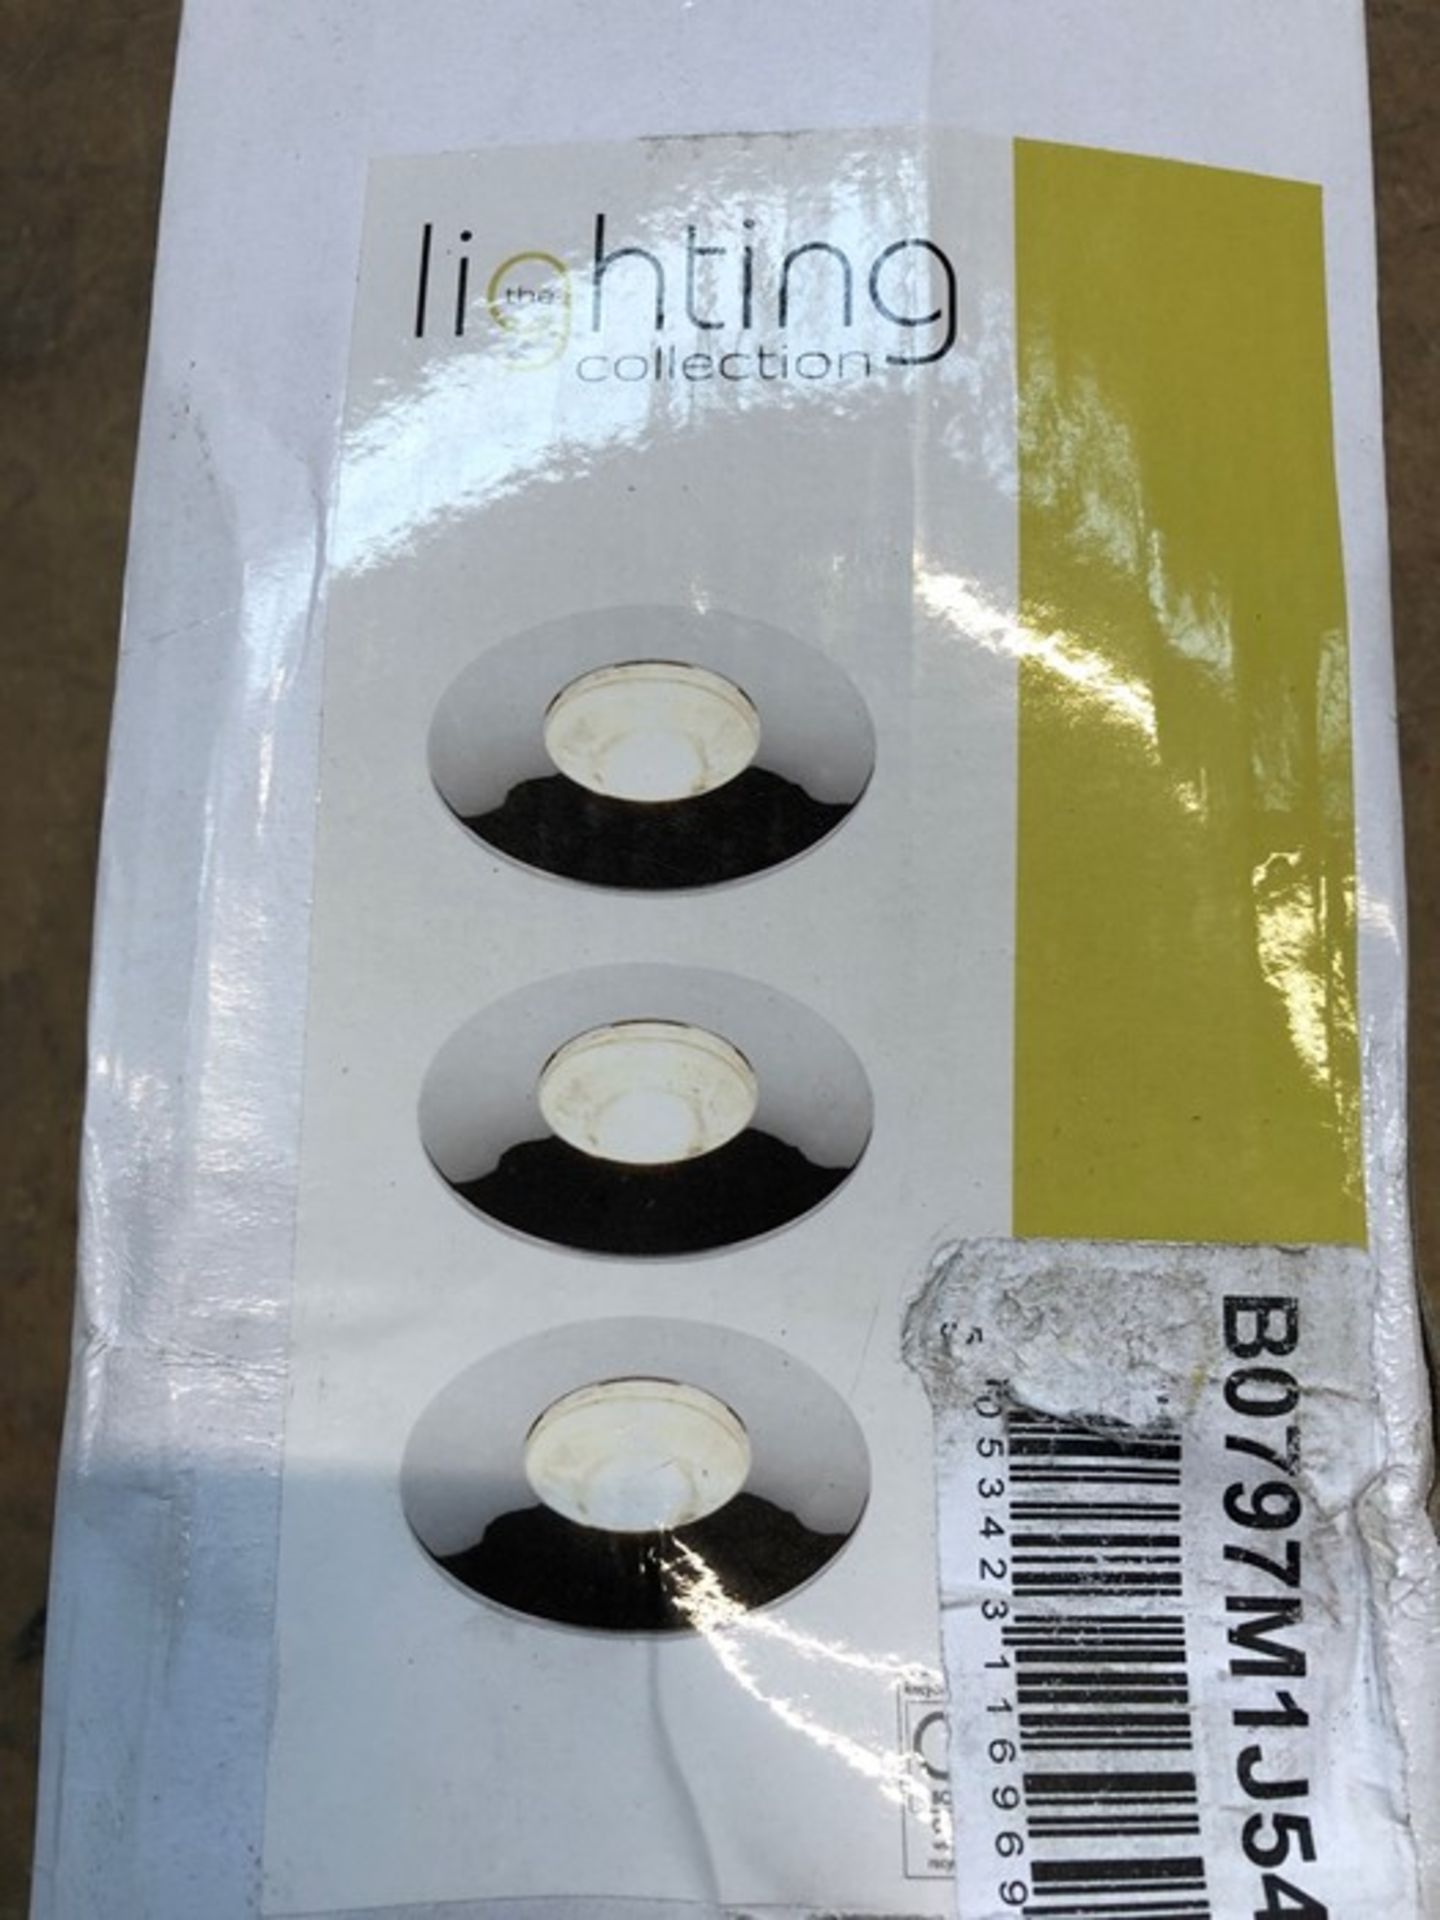 1 LOT TO CONTAIN LUMINAIRE CELING LIGHT CONTAINING 3 LED LIGHTS